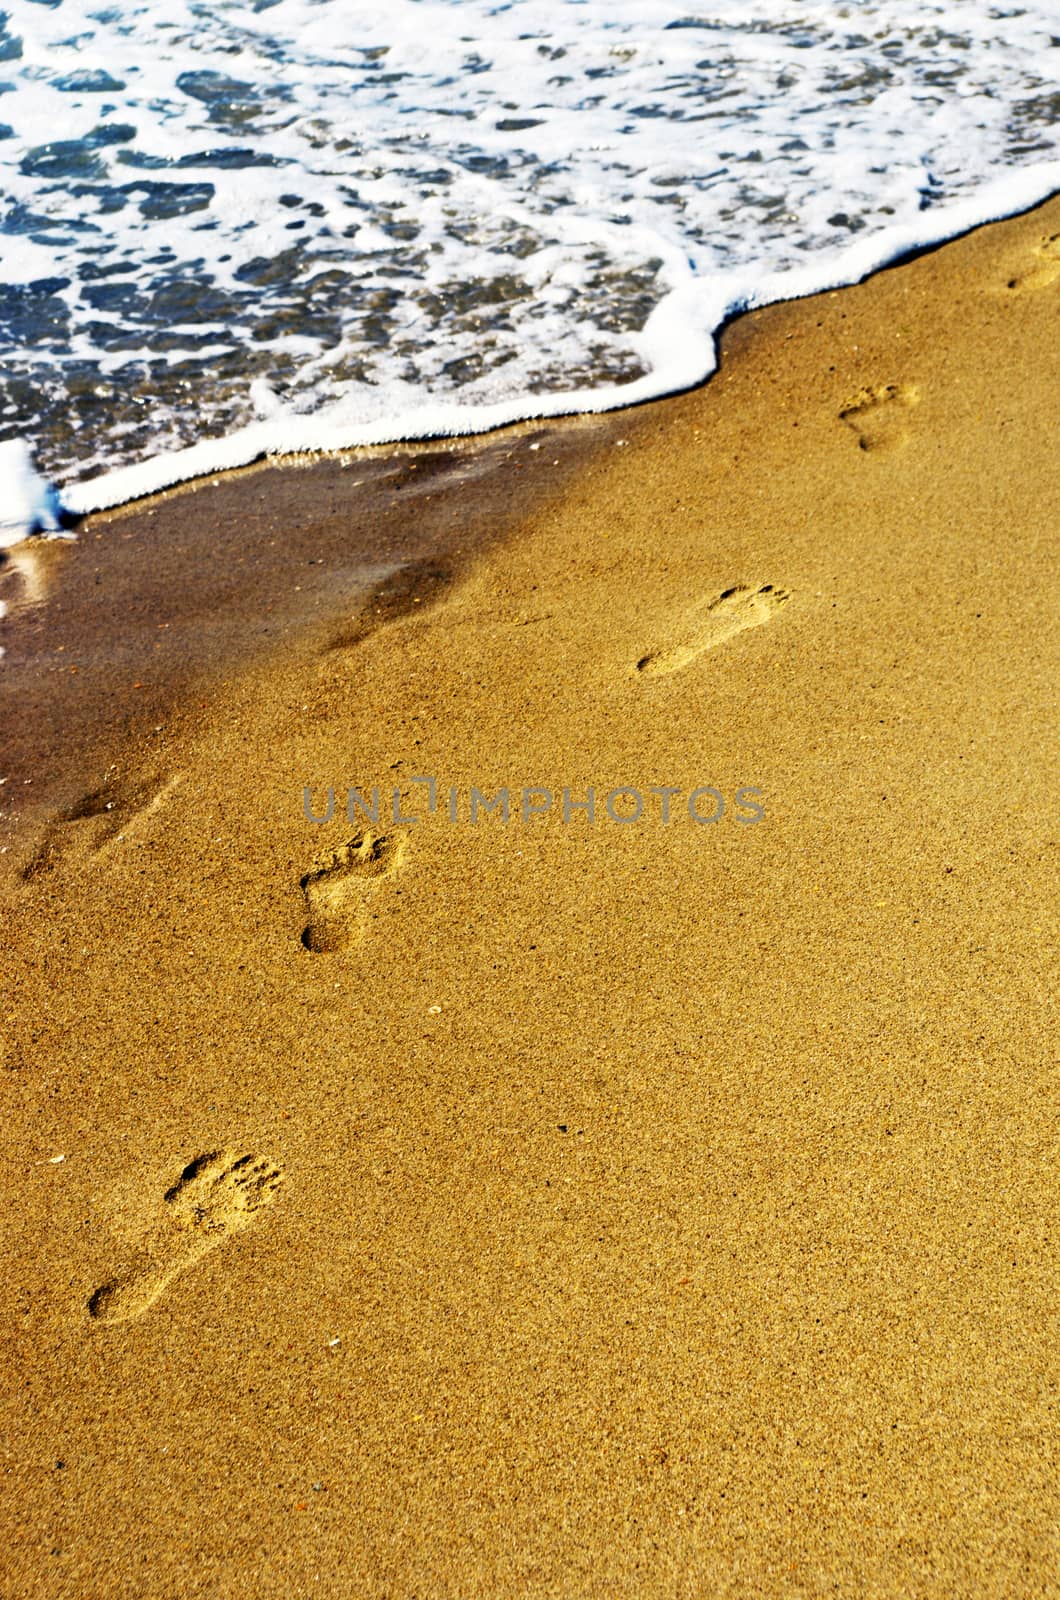 human prints on the beach. by dolnikow